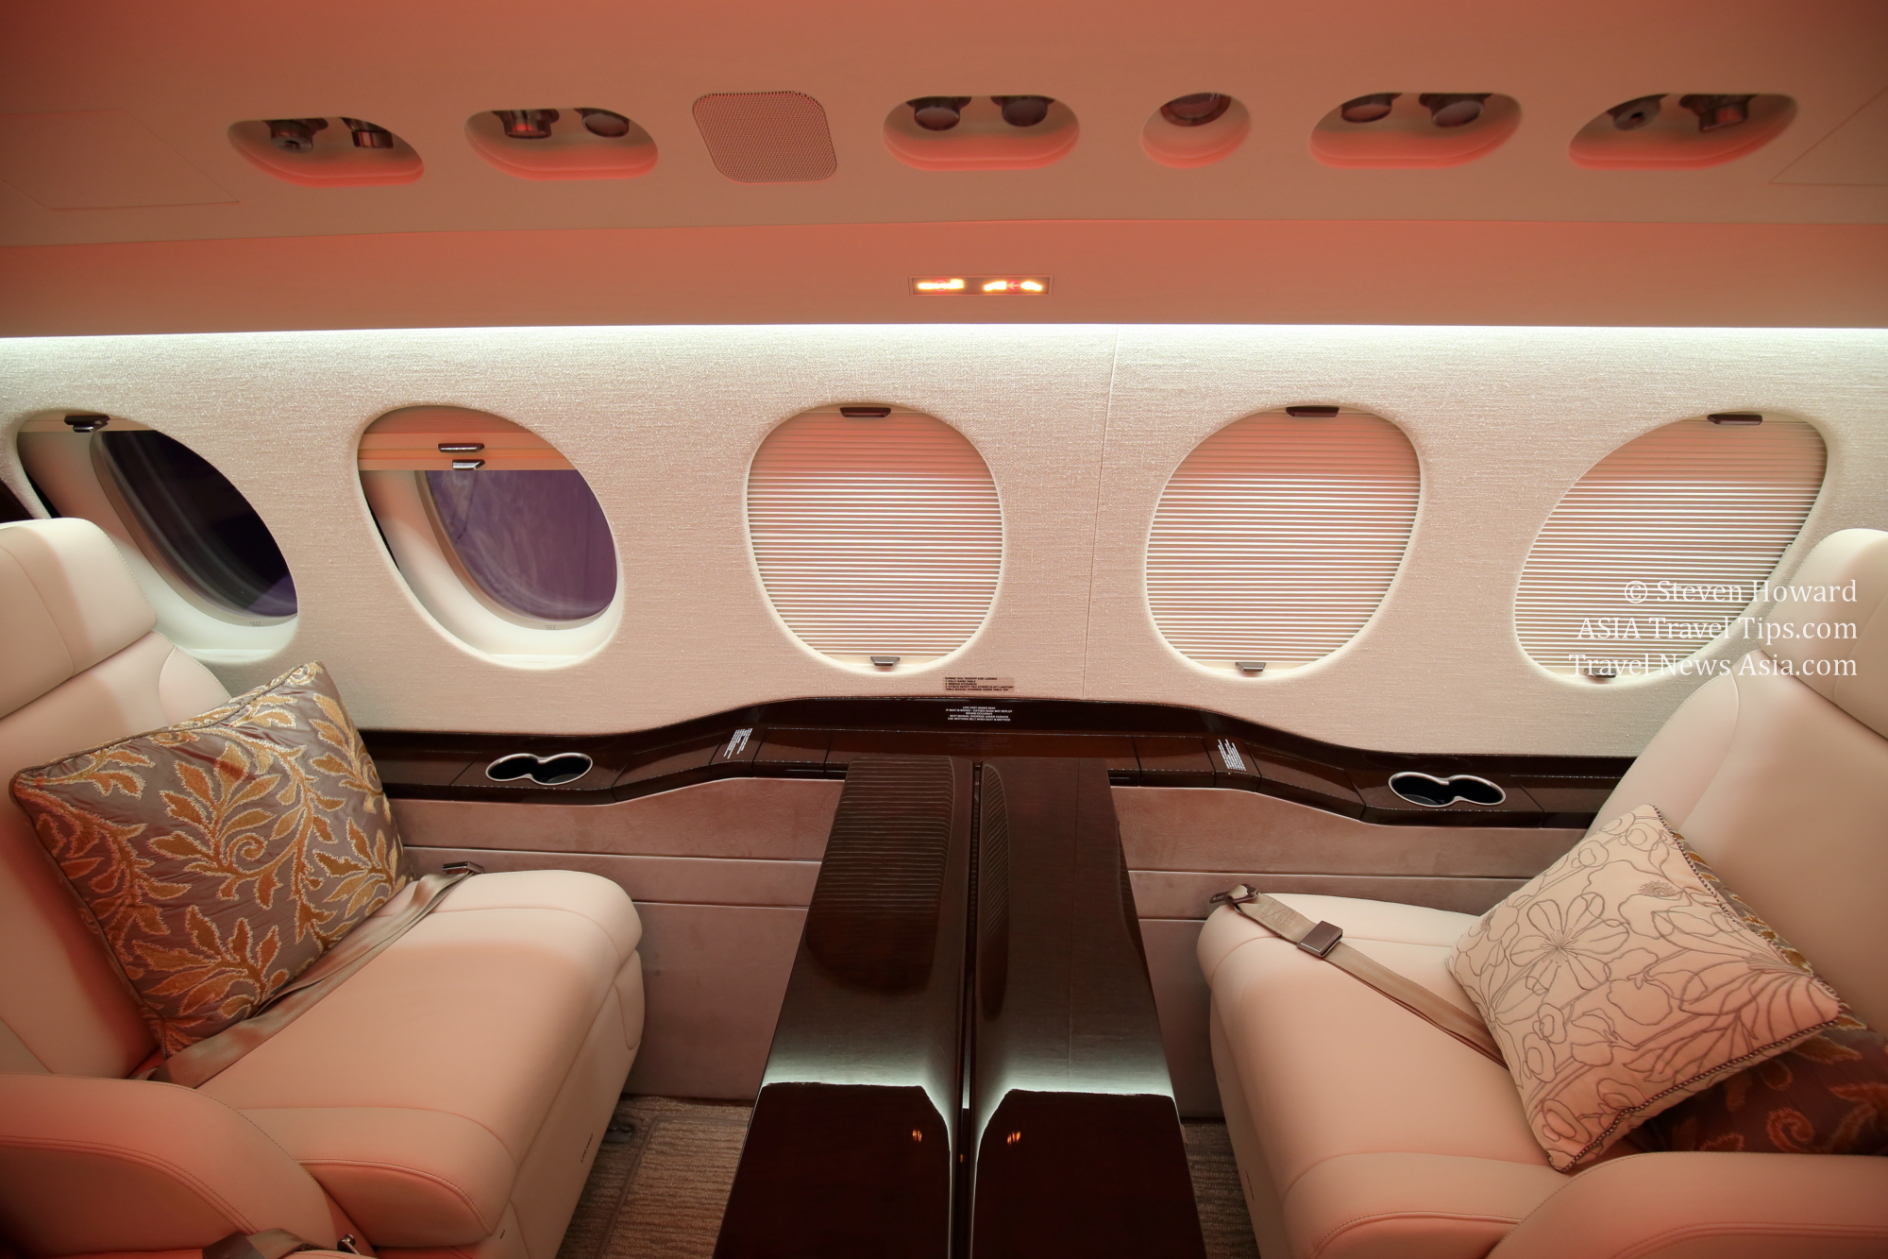 Inside a Dassault Falcon 8X. Picture by Steven Howard of TravelNewsAsia.com Click to enlarge.